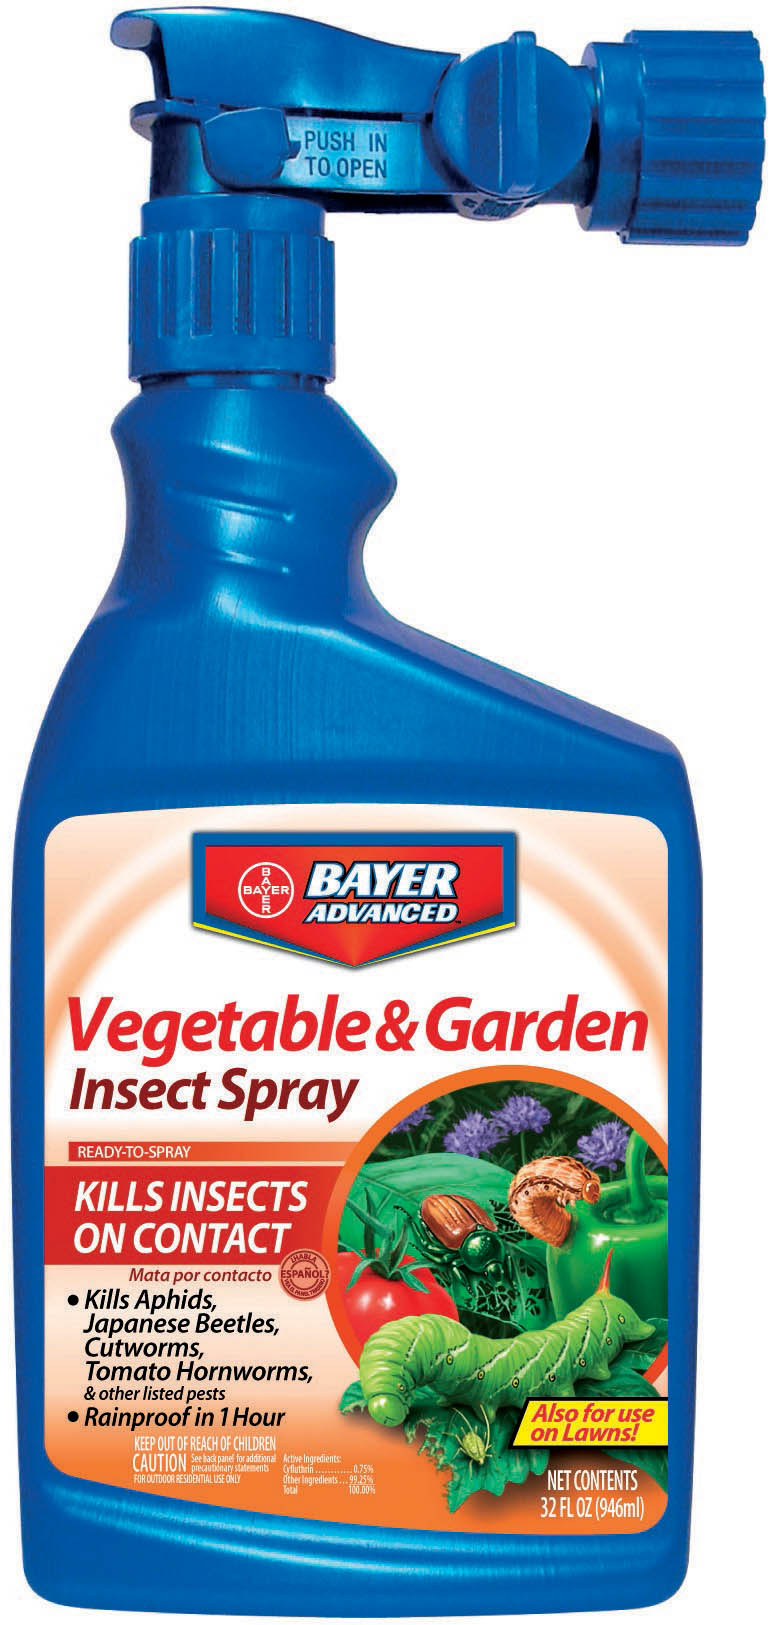 BAYER ADVANCED COMPLETE INSECT KILLER READY-TO-USE | lupon.gov.ph